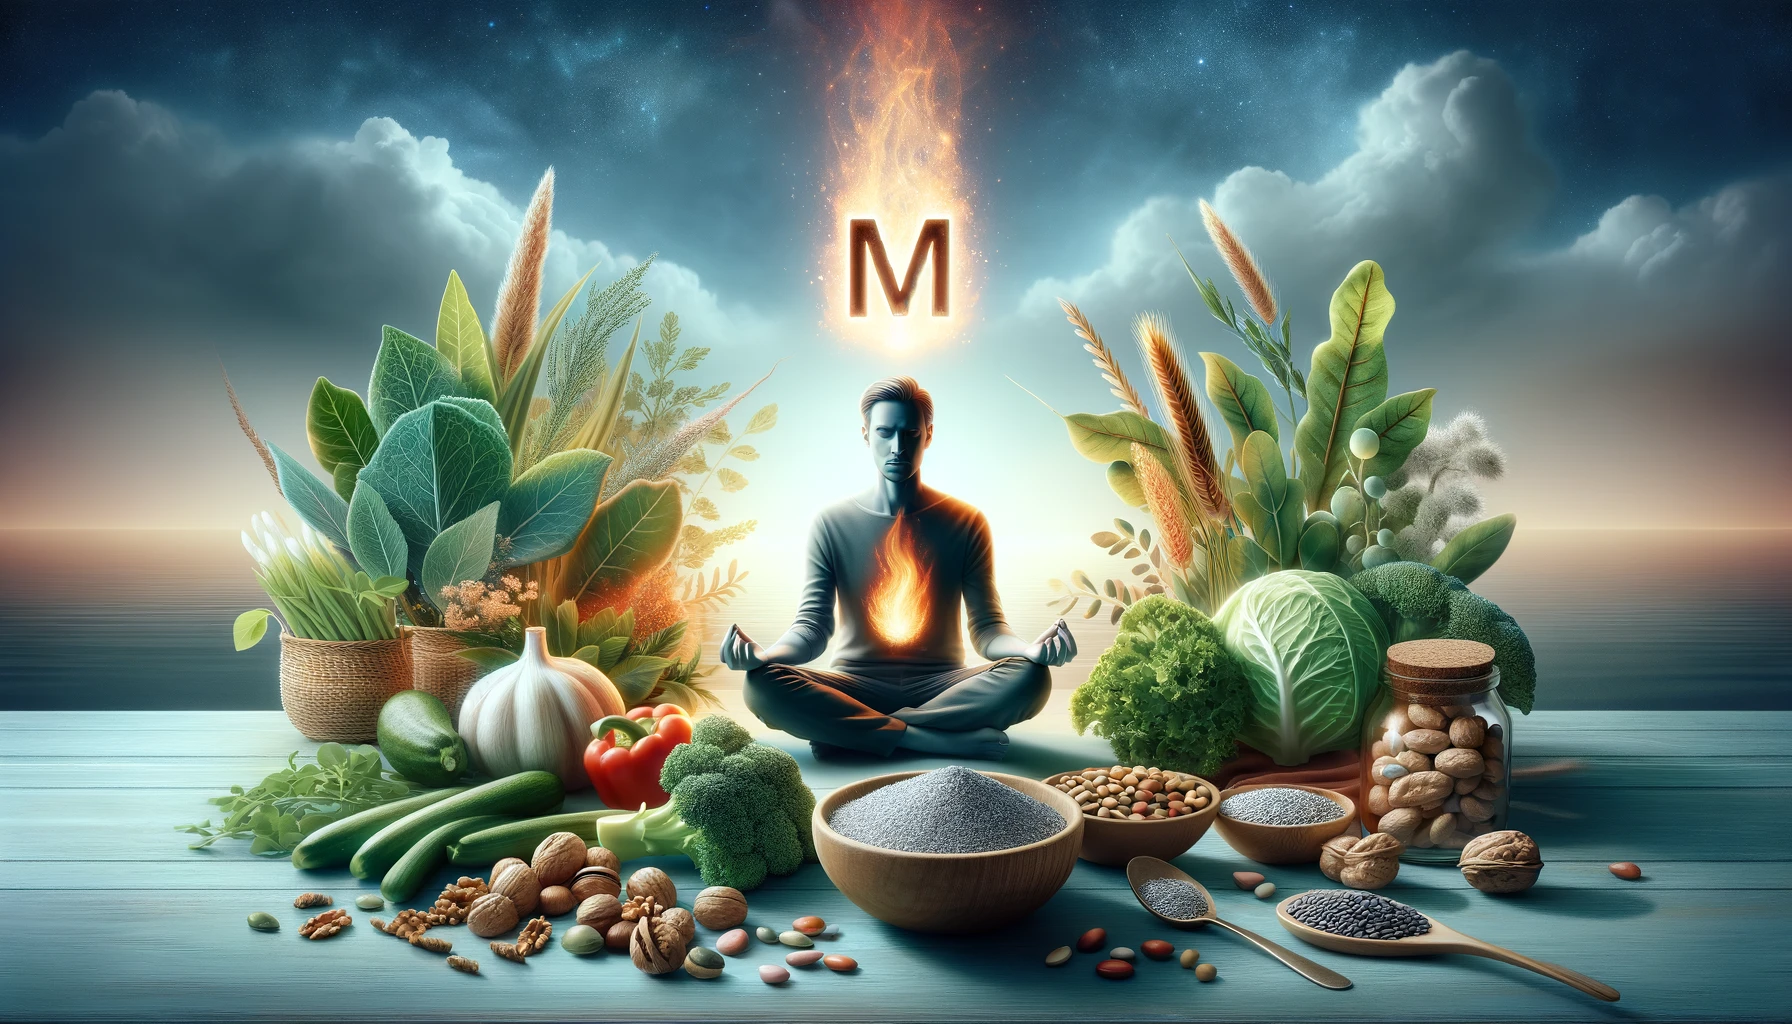 An individual relaxing with a variety of magnesium-rich foods around them, including leafy greens, nuts, and grains, with a conceptual element of magnesium soothing inflammation.